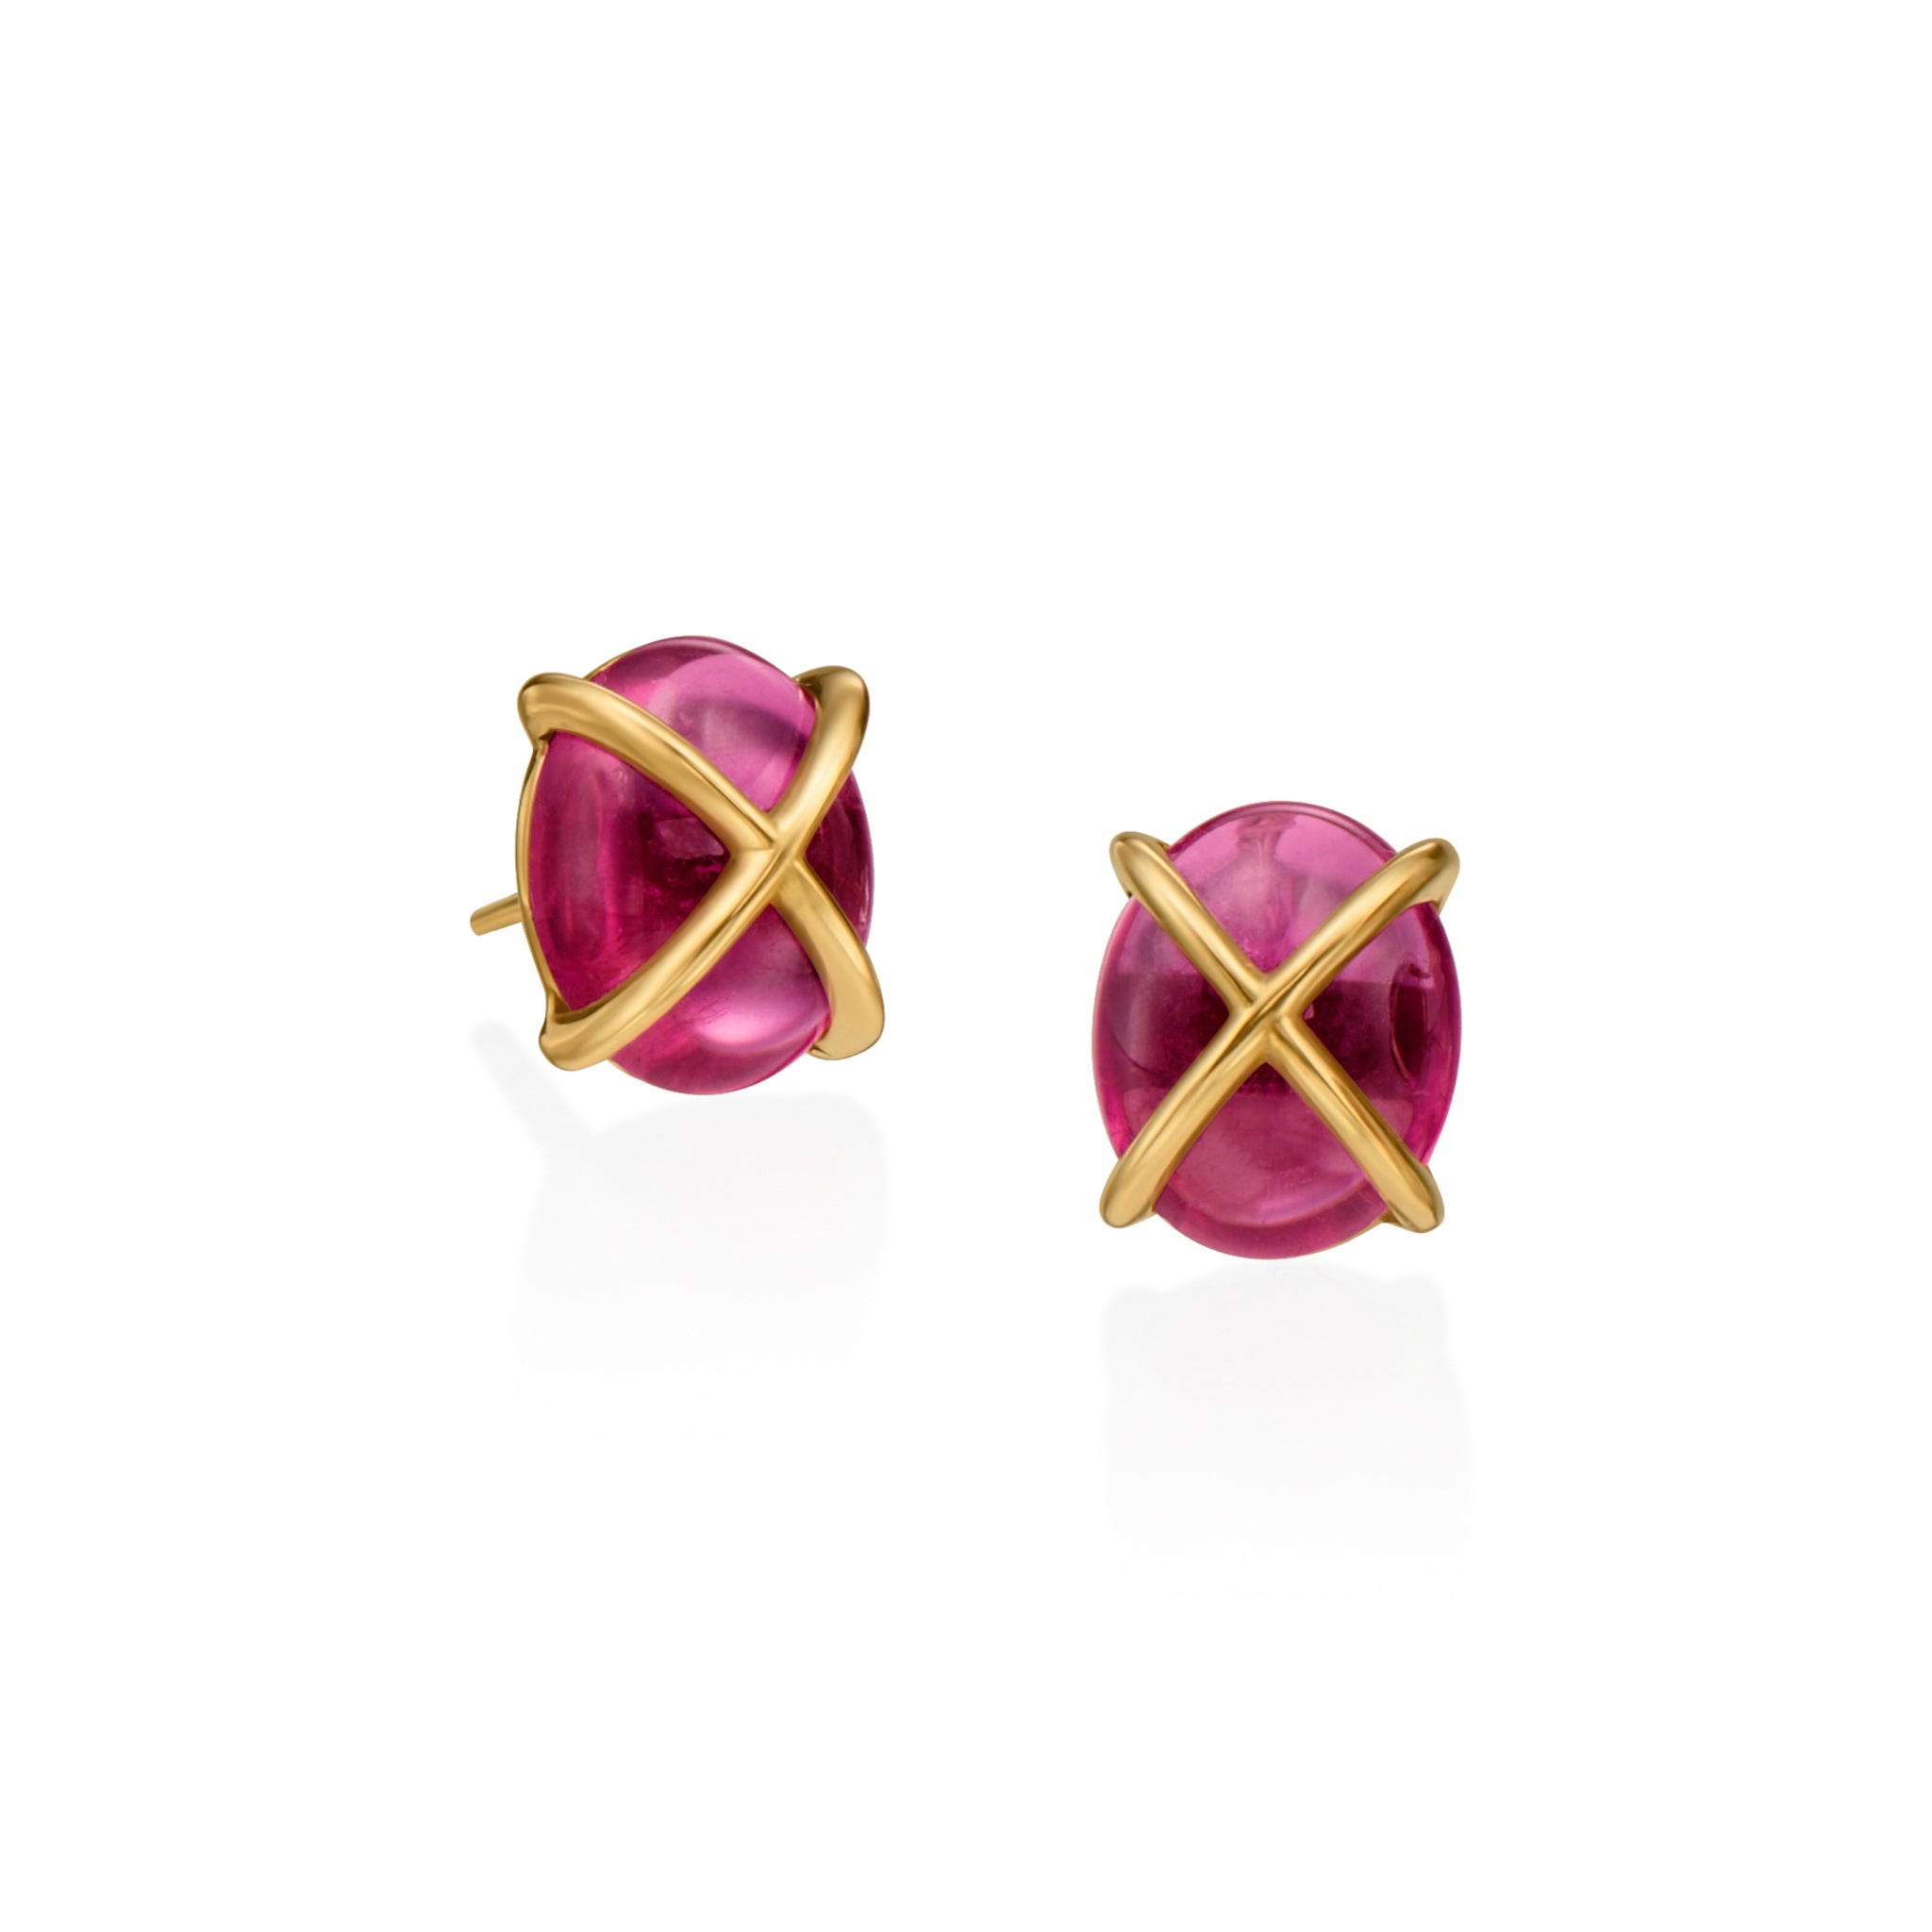 Cabochon Rubellite and 18k Gold Earrings